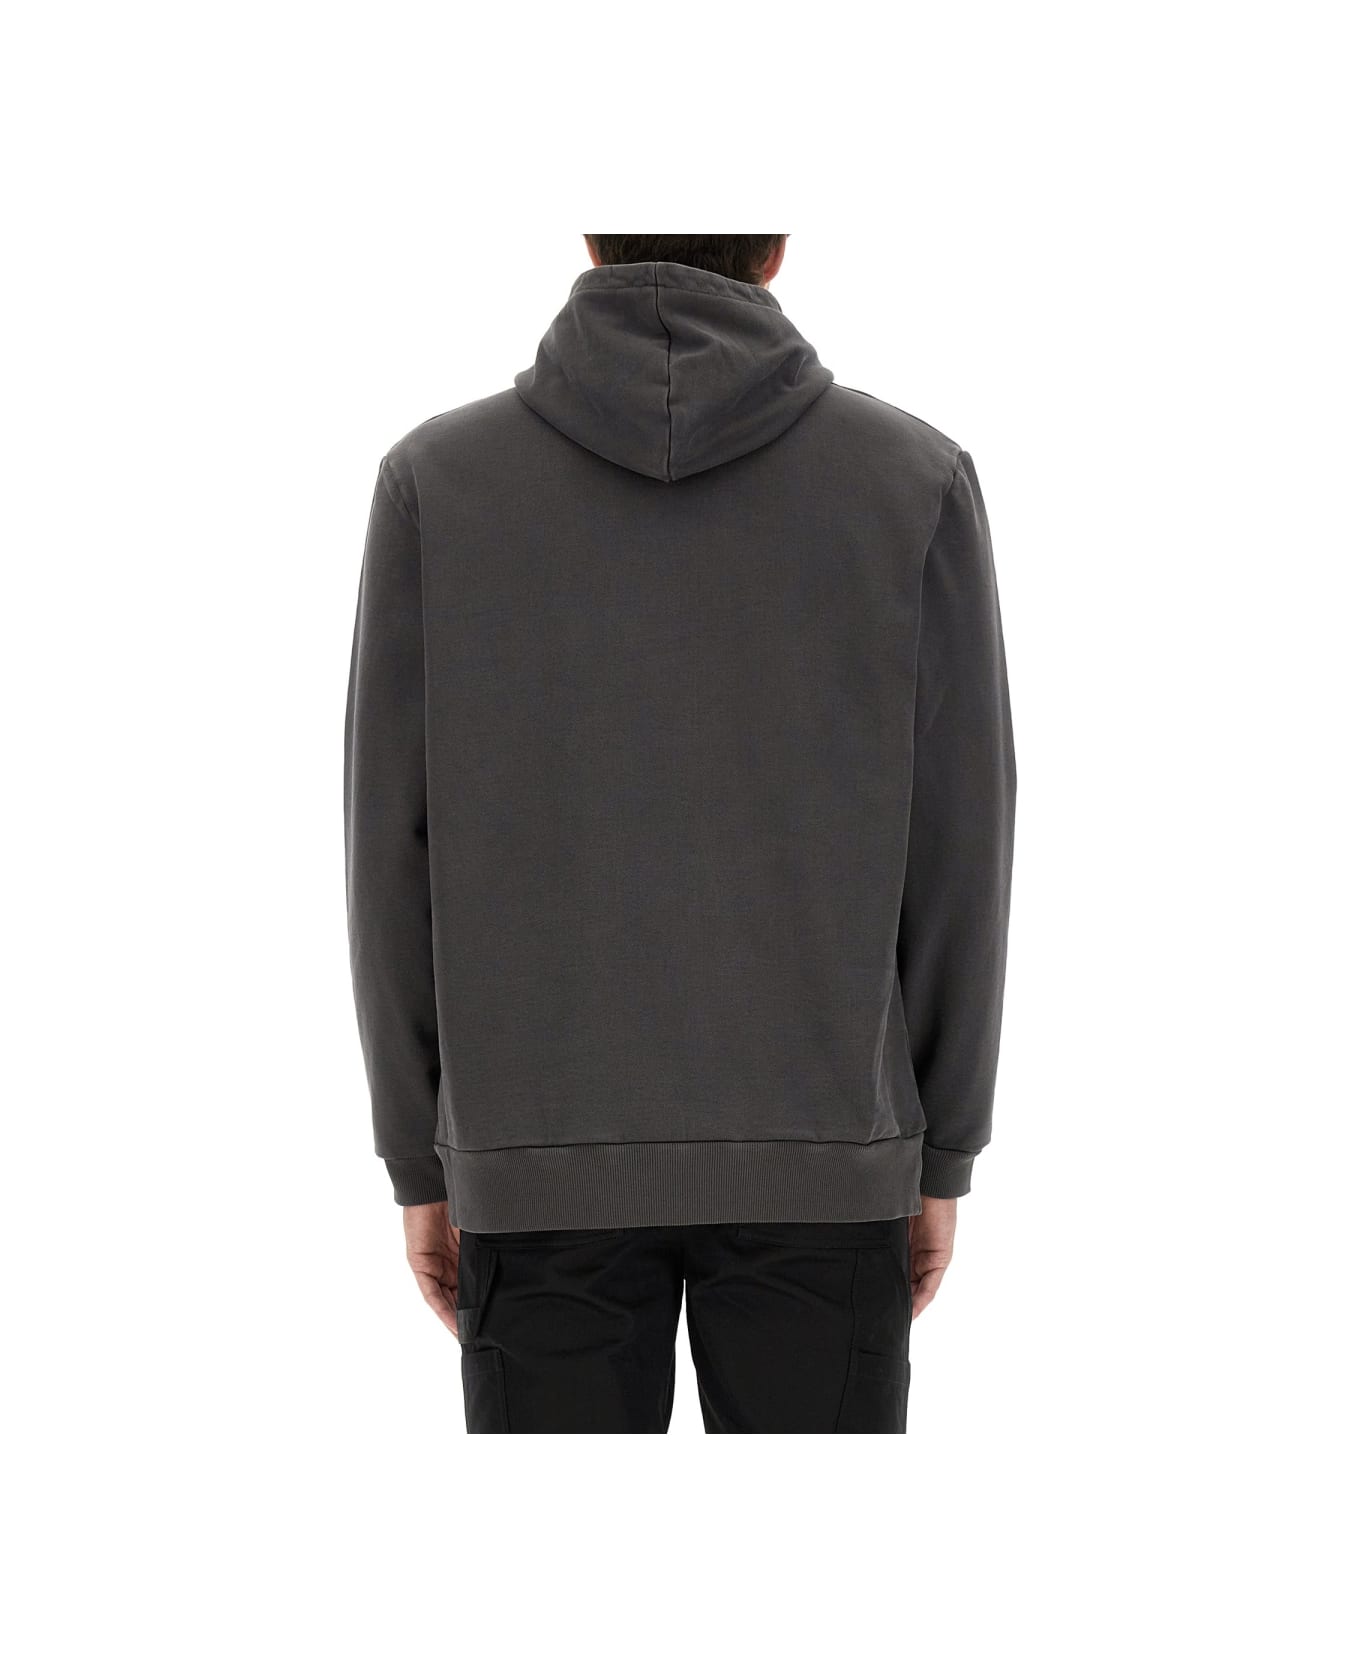 Fred Perry Sweatshirt With Logo - CHARCOAL